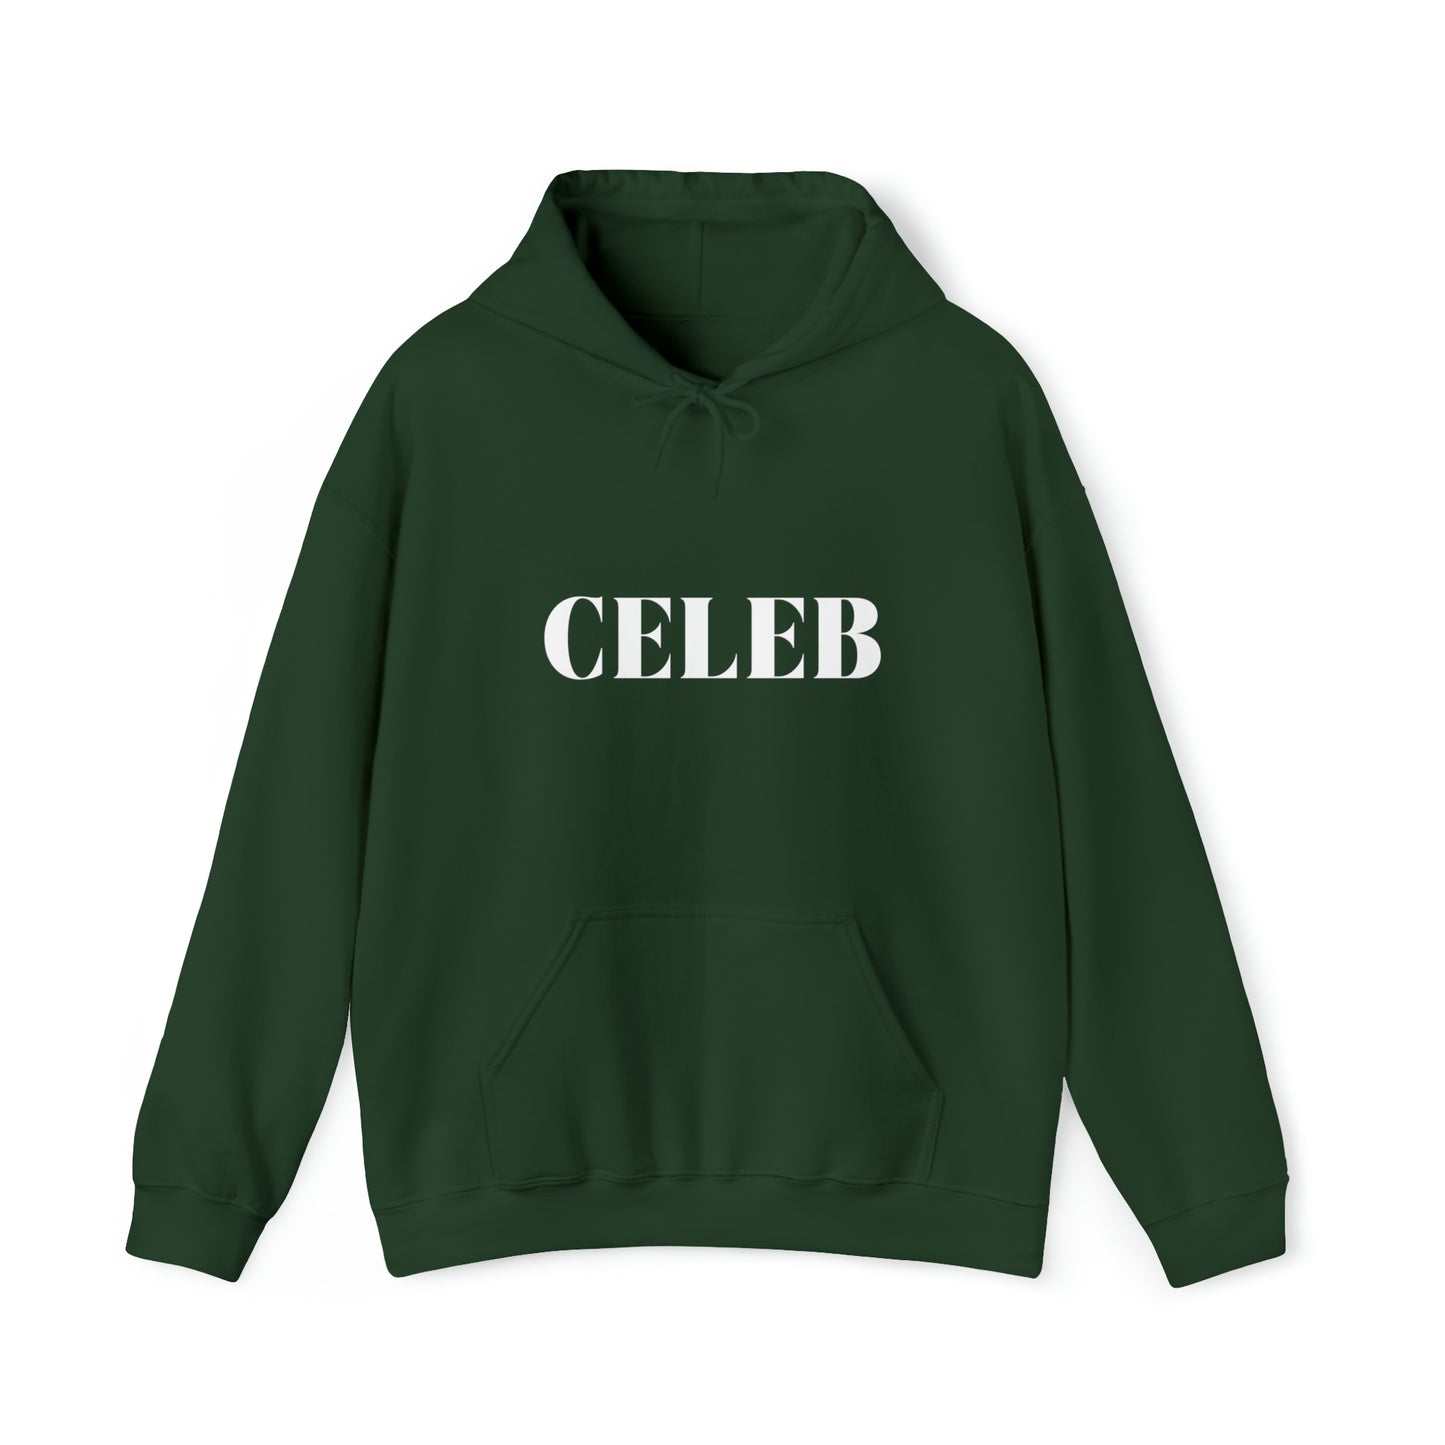 S Forest Green Celeb Hoodie from HoodySZN.com